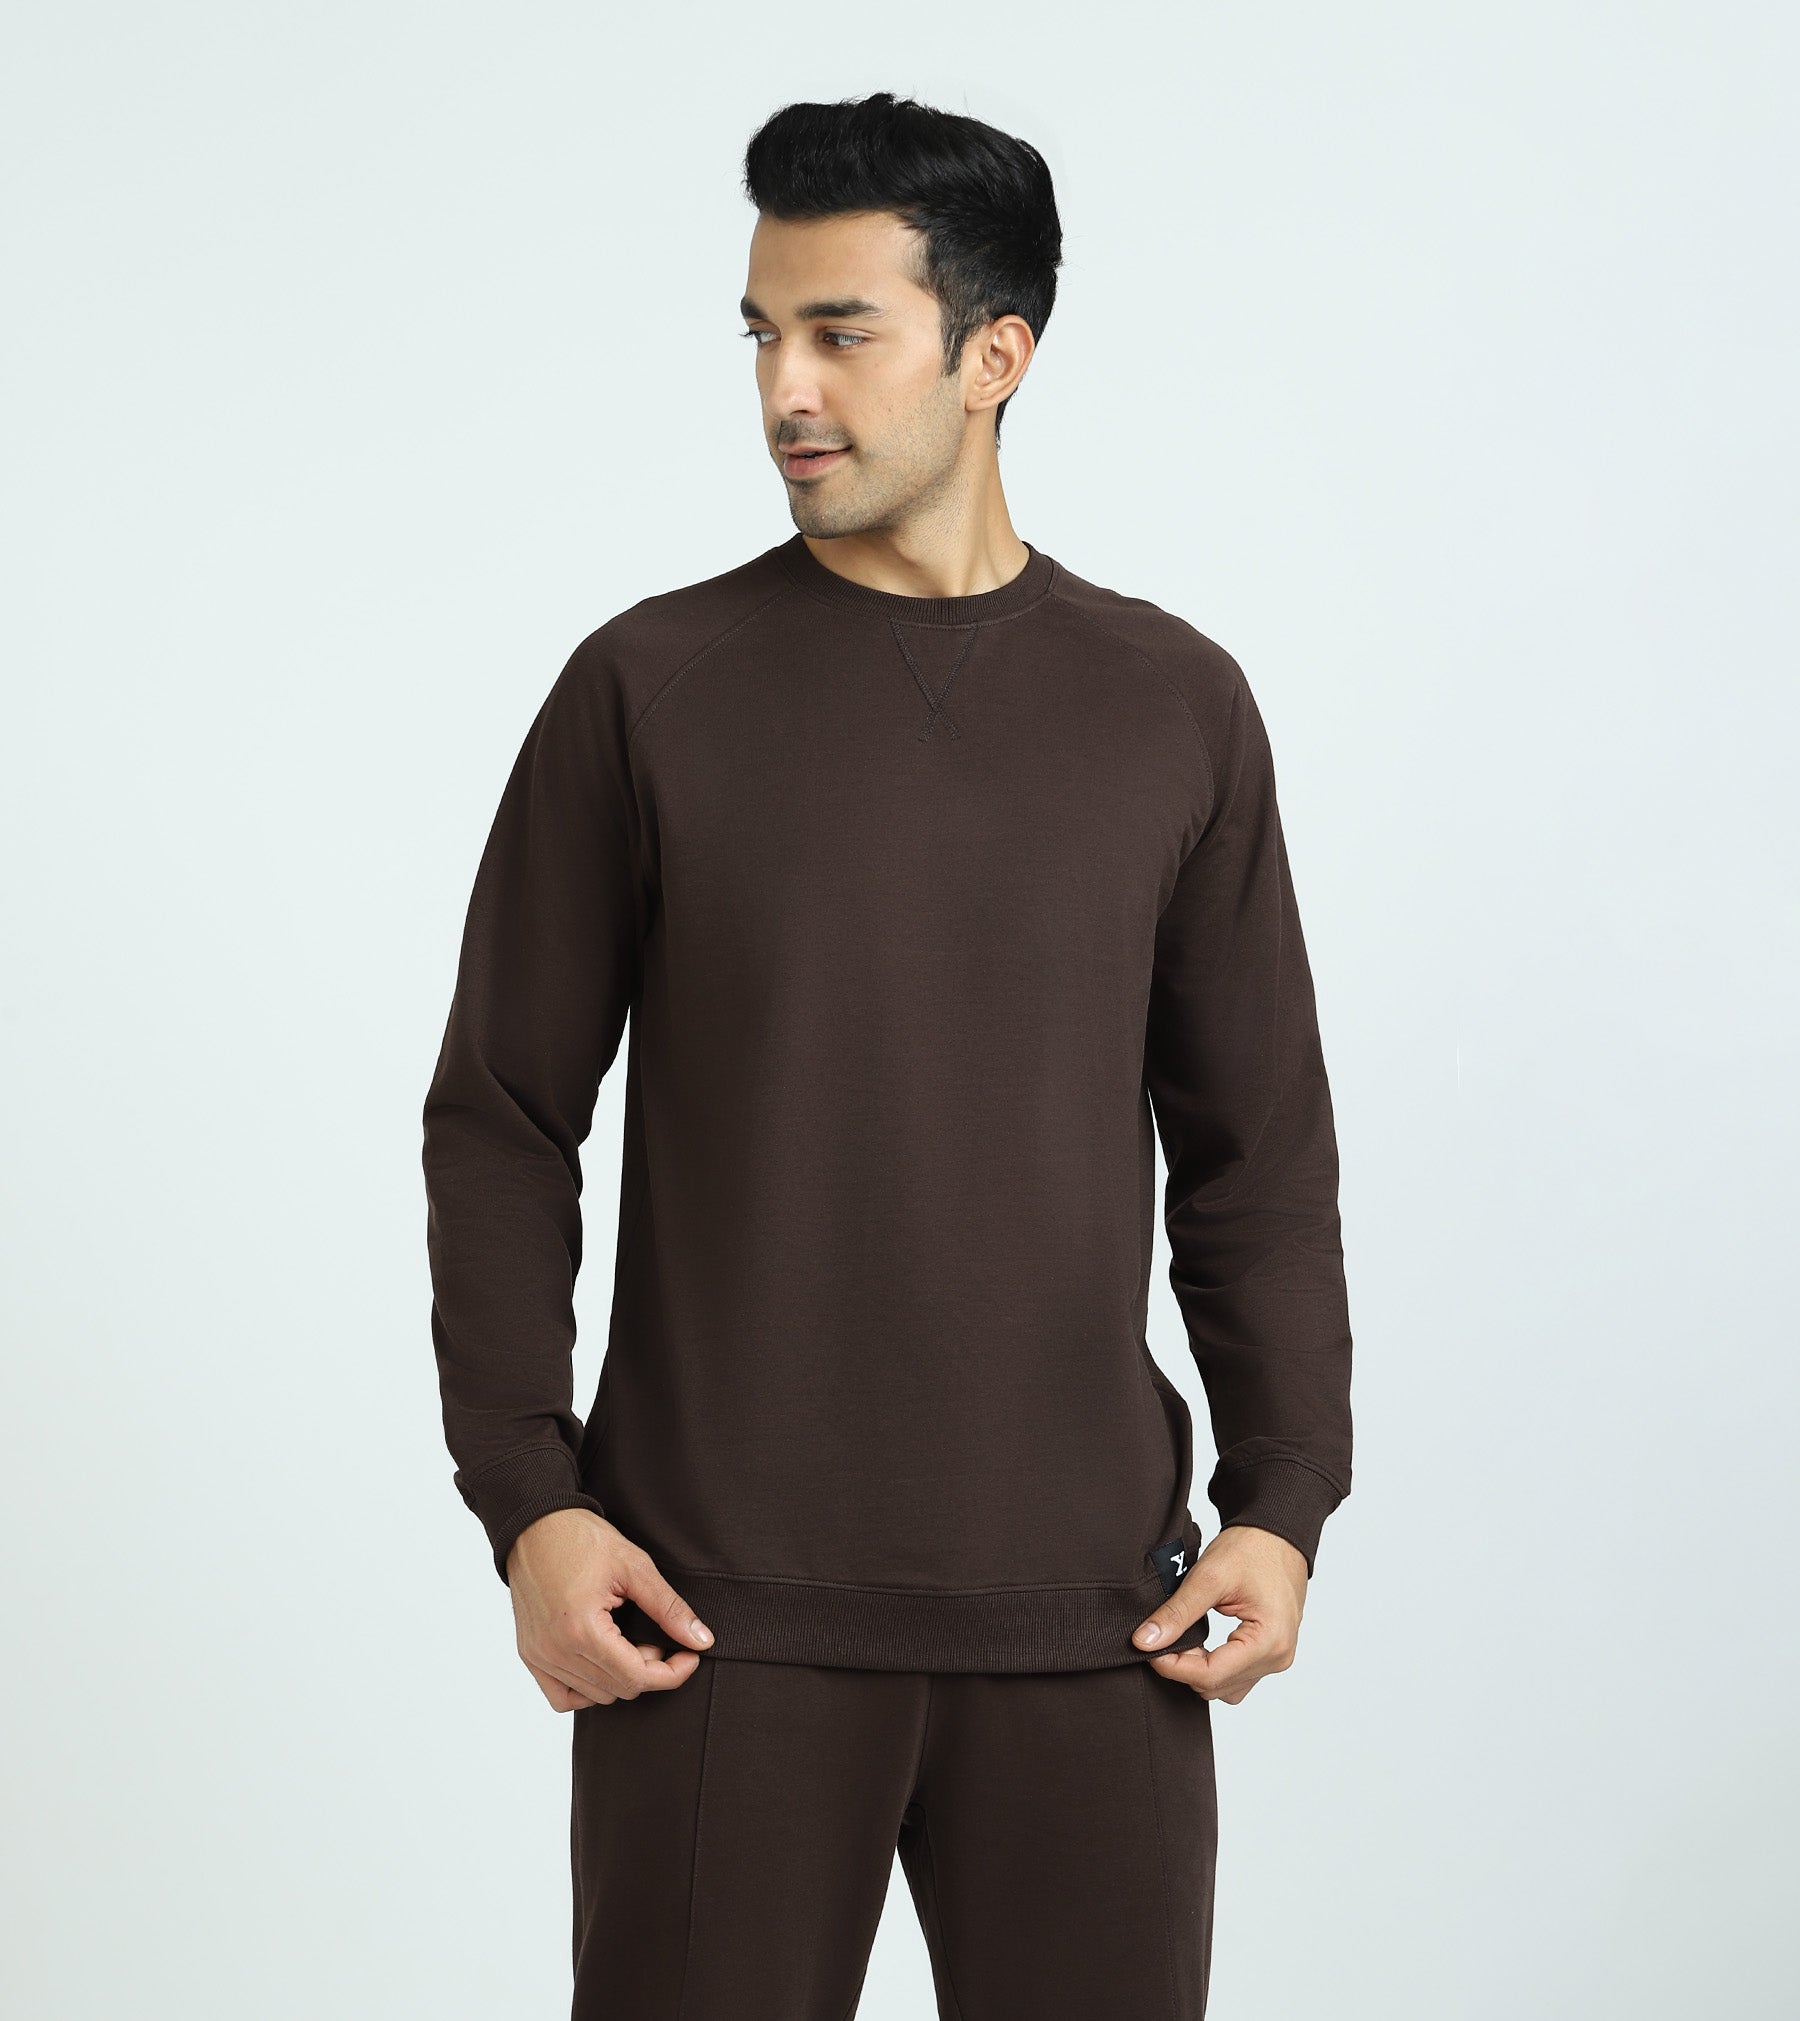 Cruze French Terry Cotton SweatShirt and Joggers Co-ord Set For Men Malt Brown - XYXX Mens Apparels